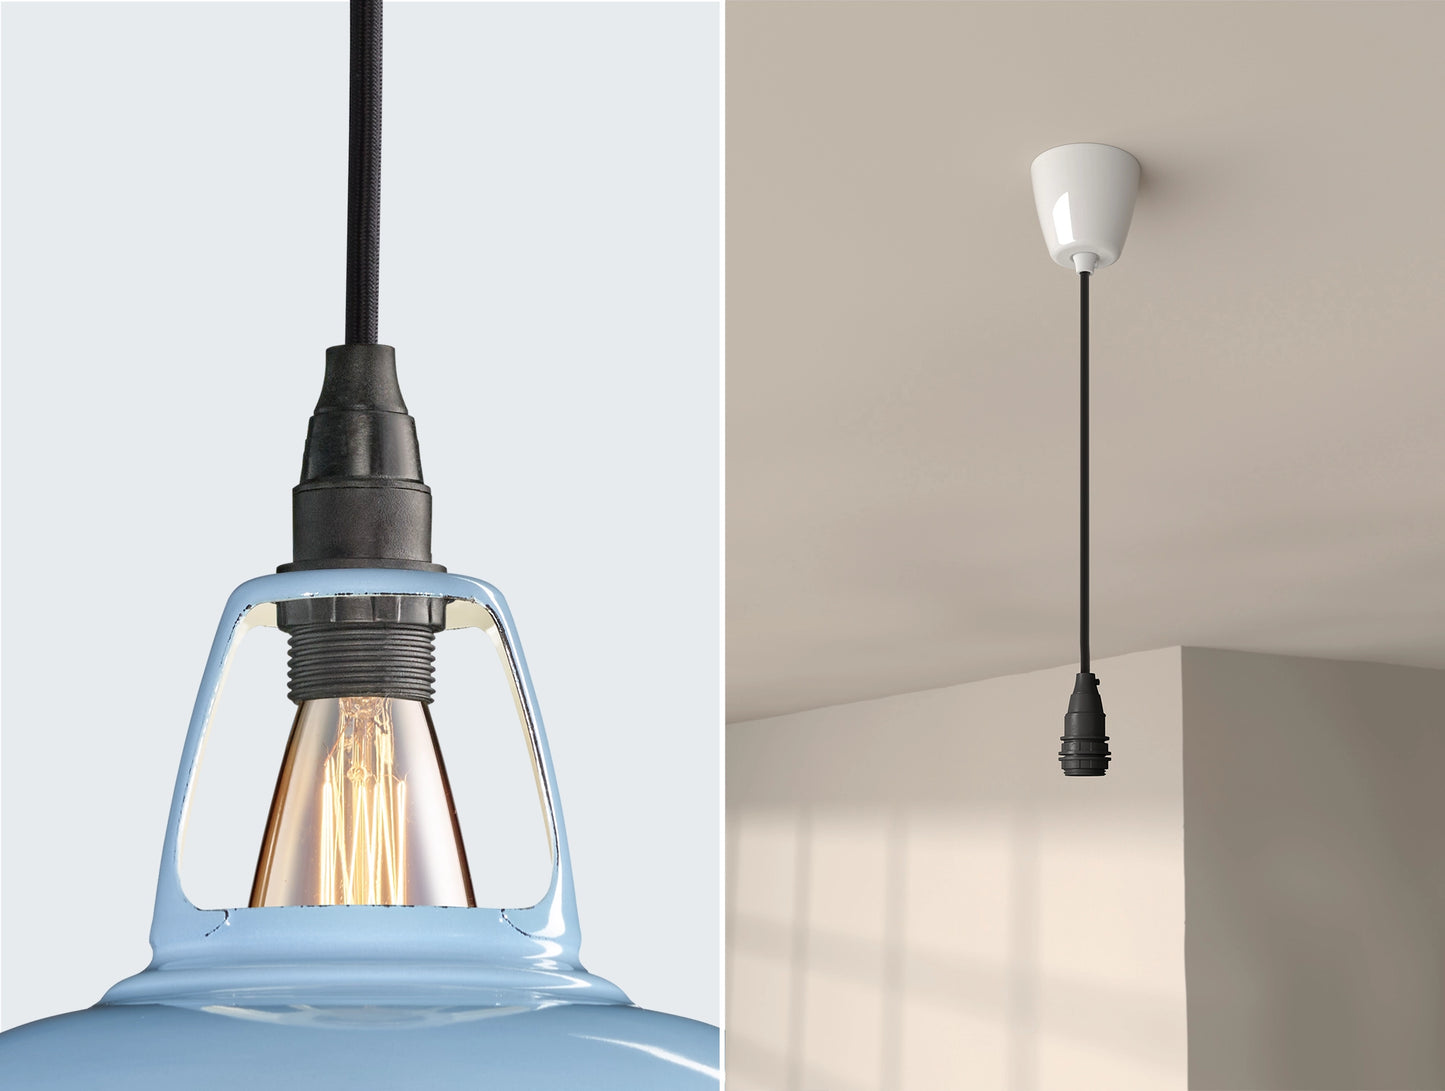 Close up of an E14 Industrial suspension set on a Sky Blue lampshade on the left. On the right, an E14 Industrial pendant set is hanging from the ceiling